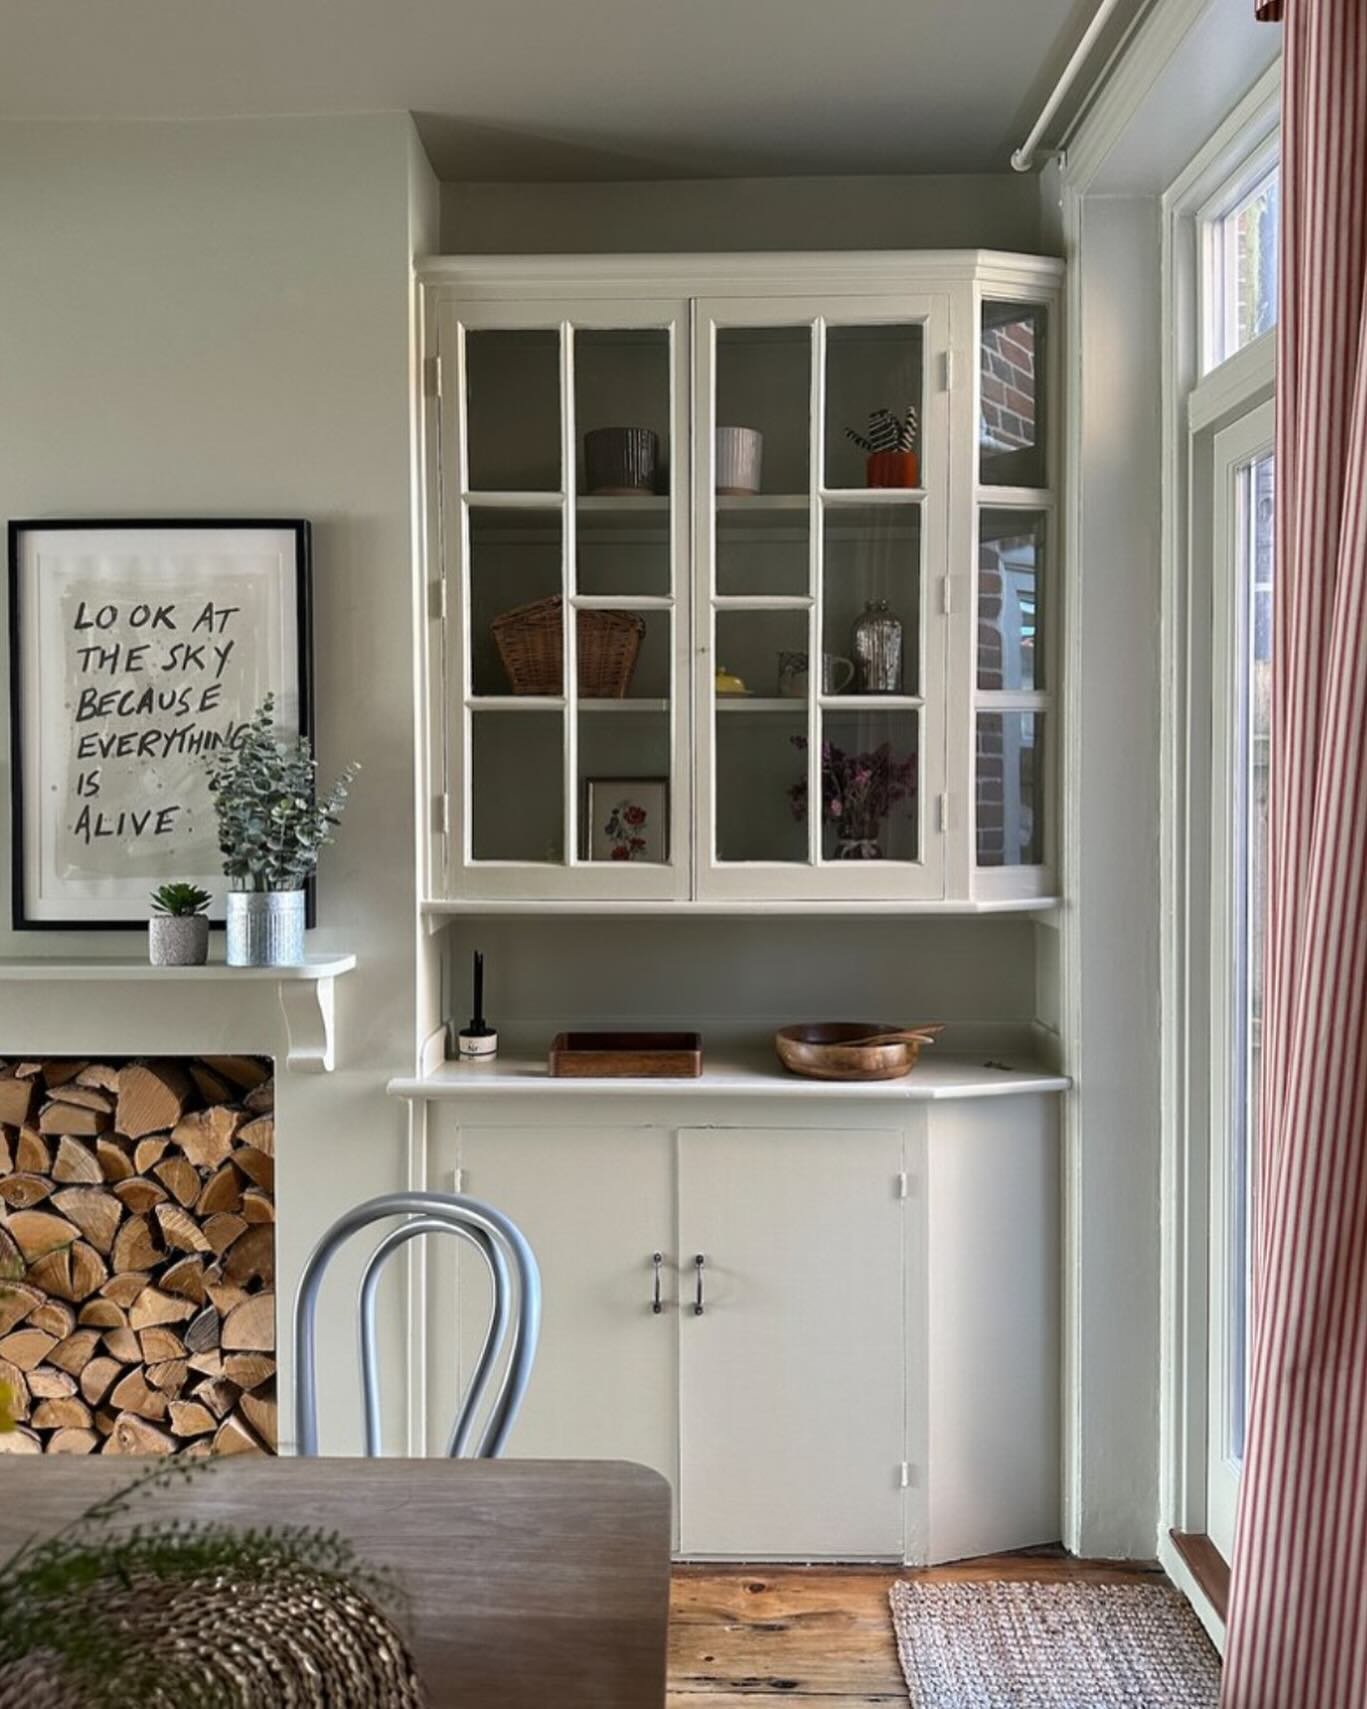 DINING &bull; dining @thenedsouthwold. Decorative built in joinery either side of the chimney breast displays little treasures and collected items, whilst the chimney area provides a handy log store for the log burner. Gorgeous red ticking curtain fr